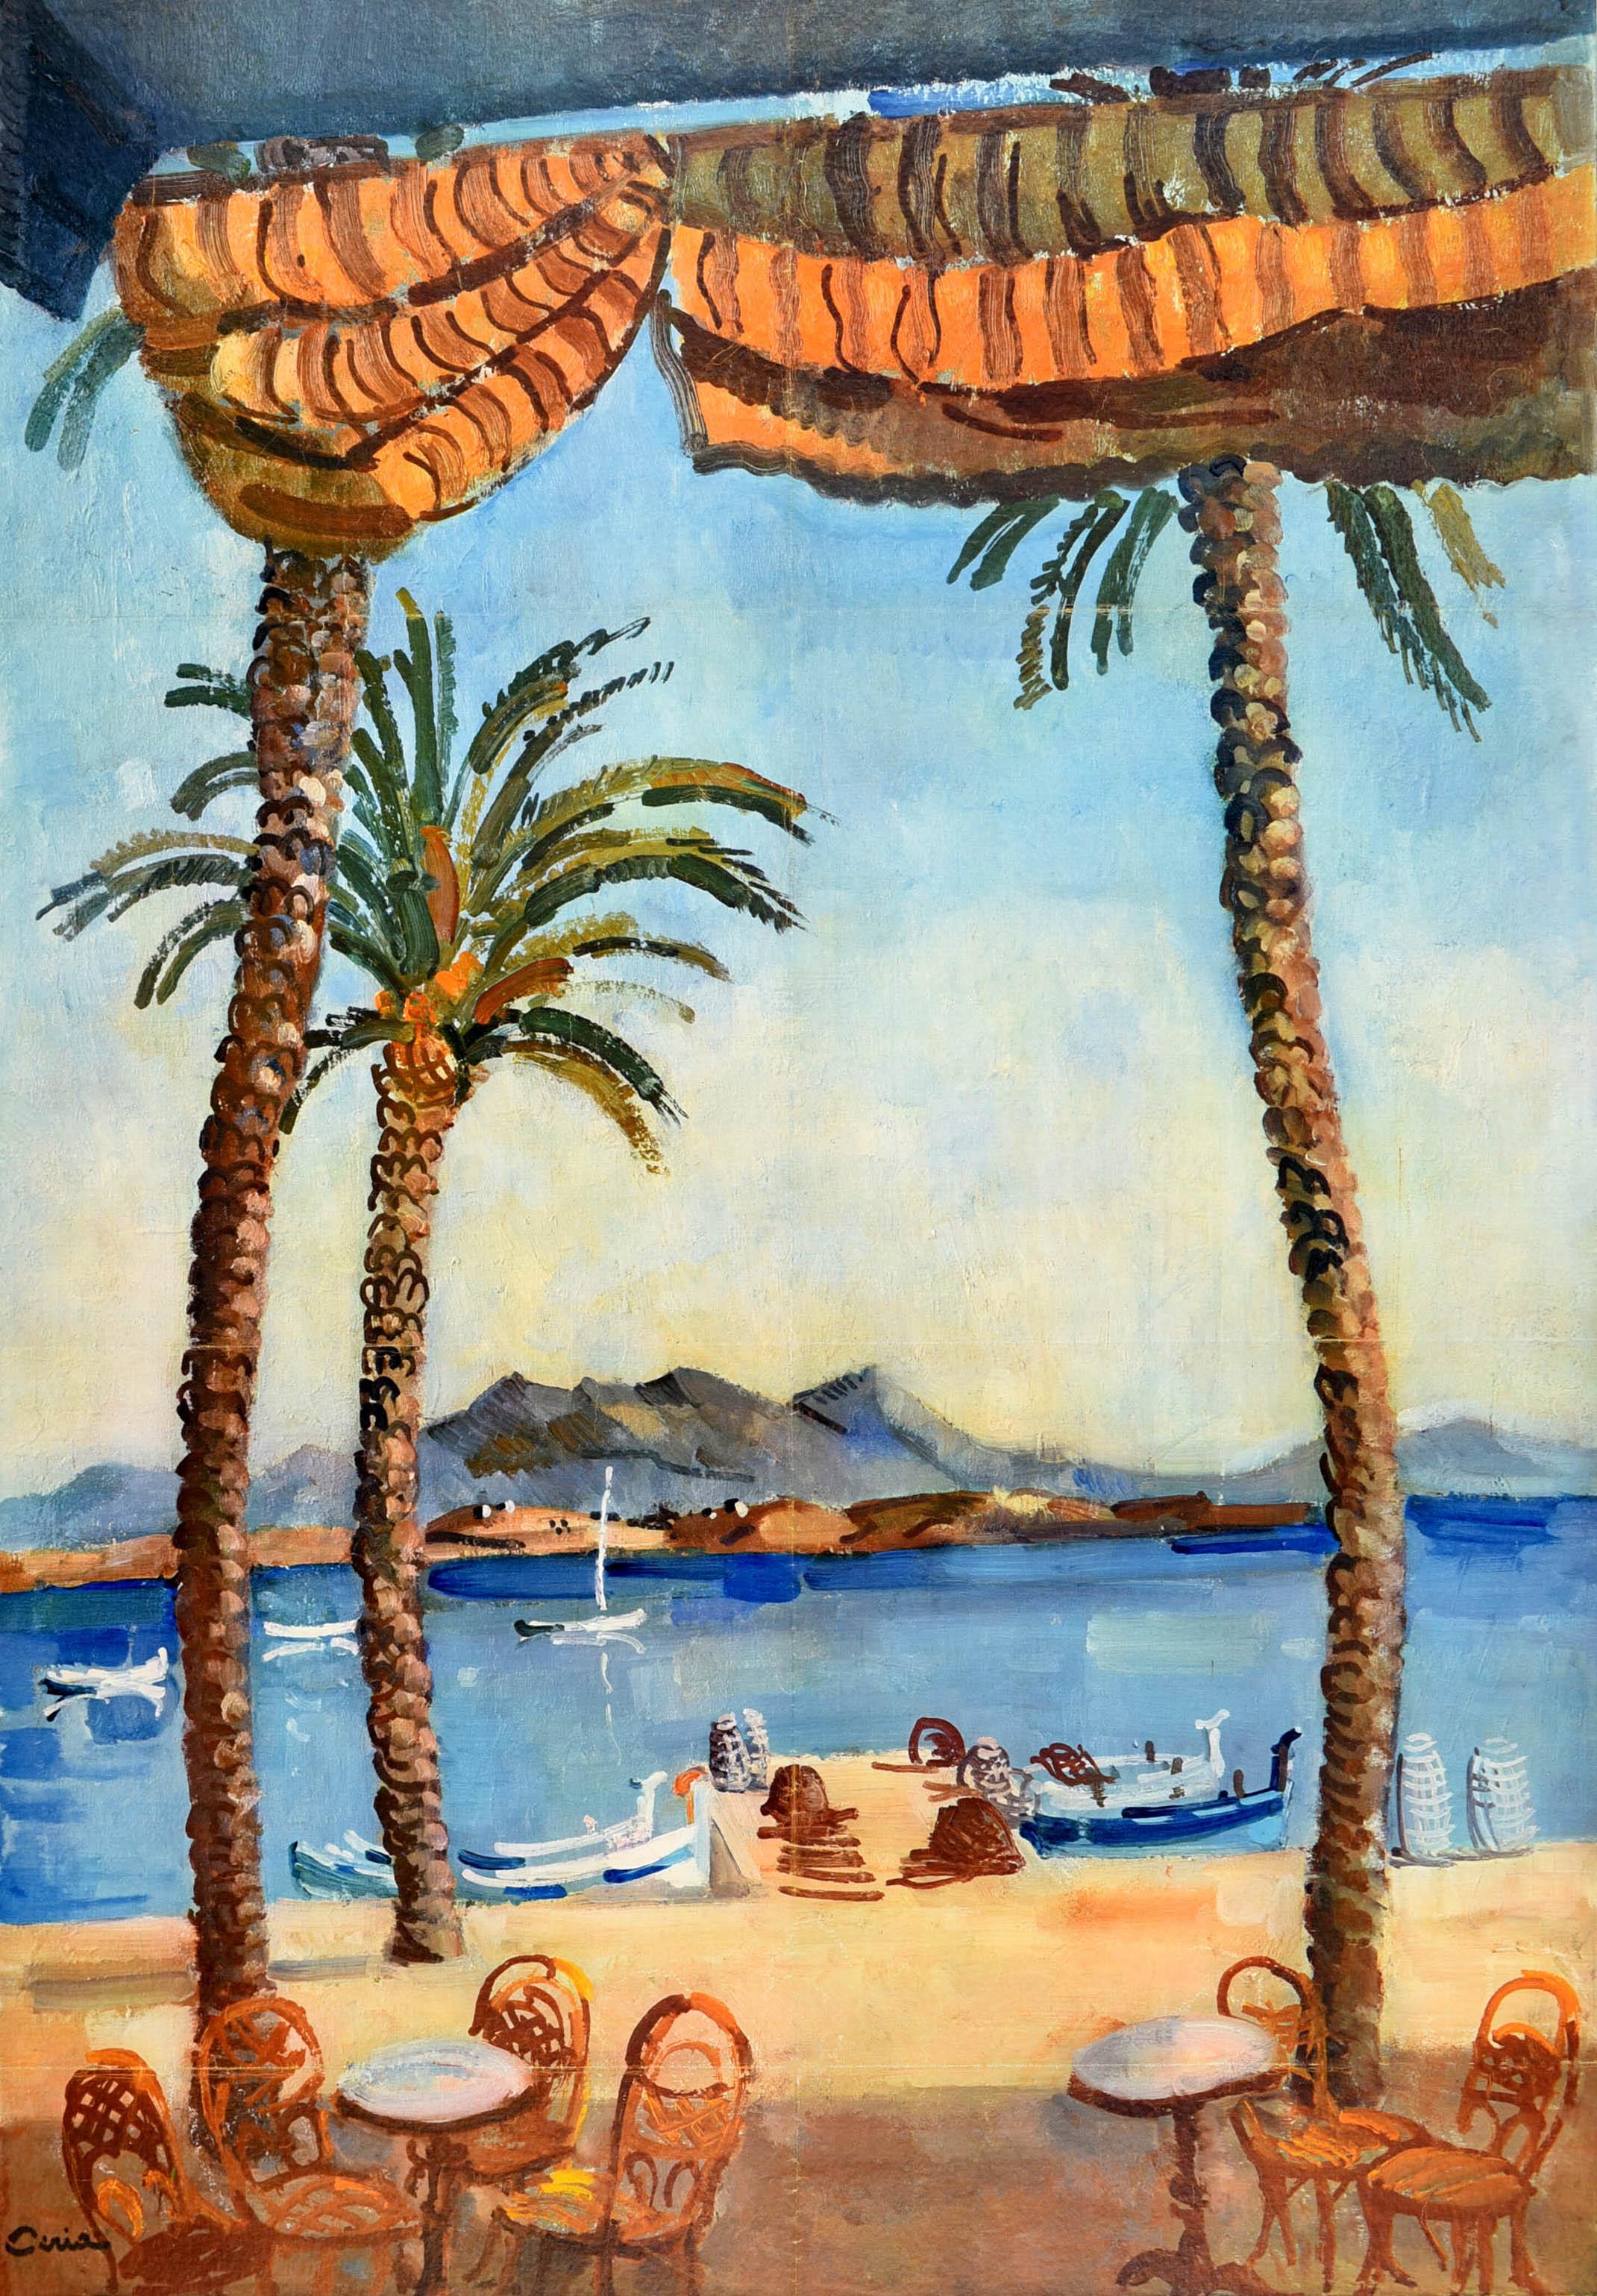 Original vintage SNCF railway travel poster for the Cote d'Azur / French Riviera on the Mediterranean coast featuring a scenic view by the French painter Edmond Ceria (1884-1955) towards hills on the horizon with sailing boats at sea and boats